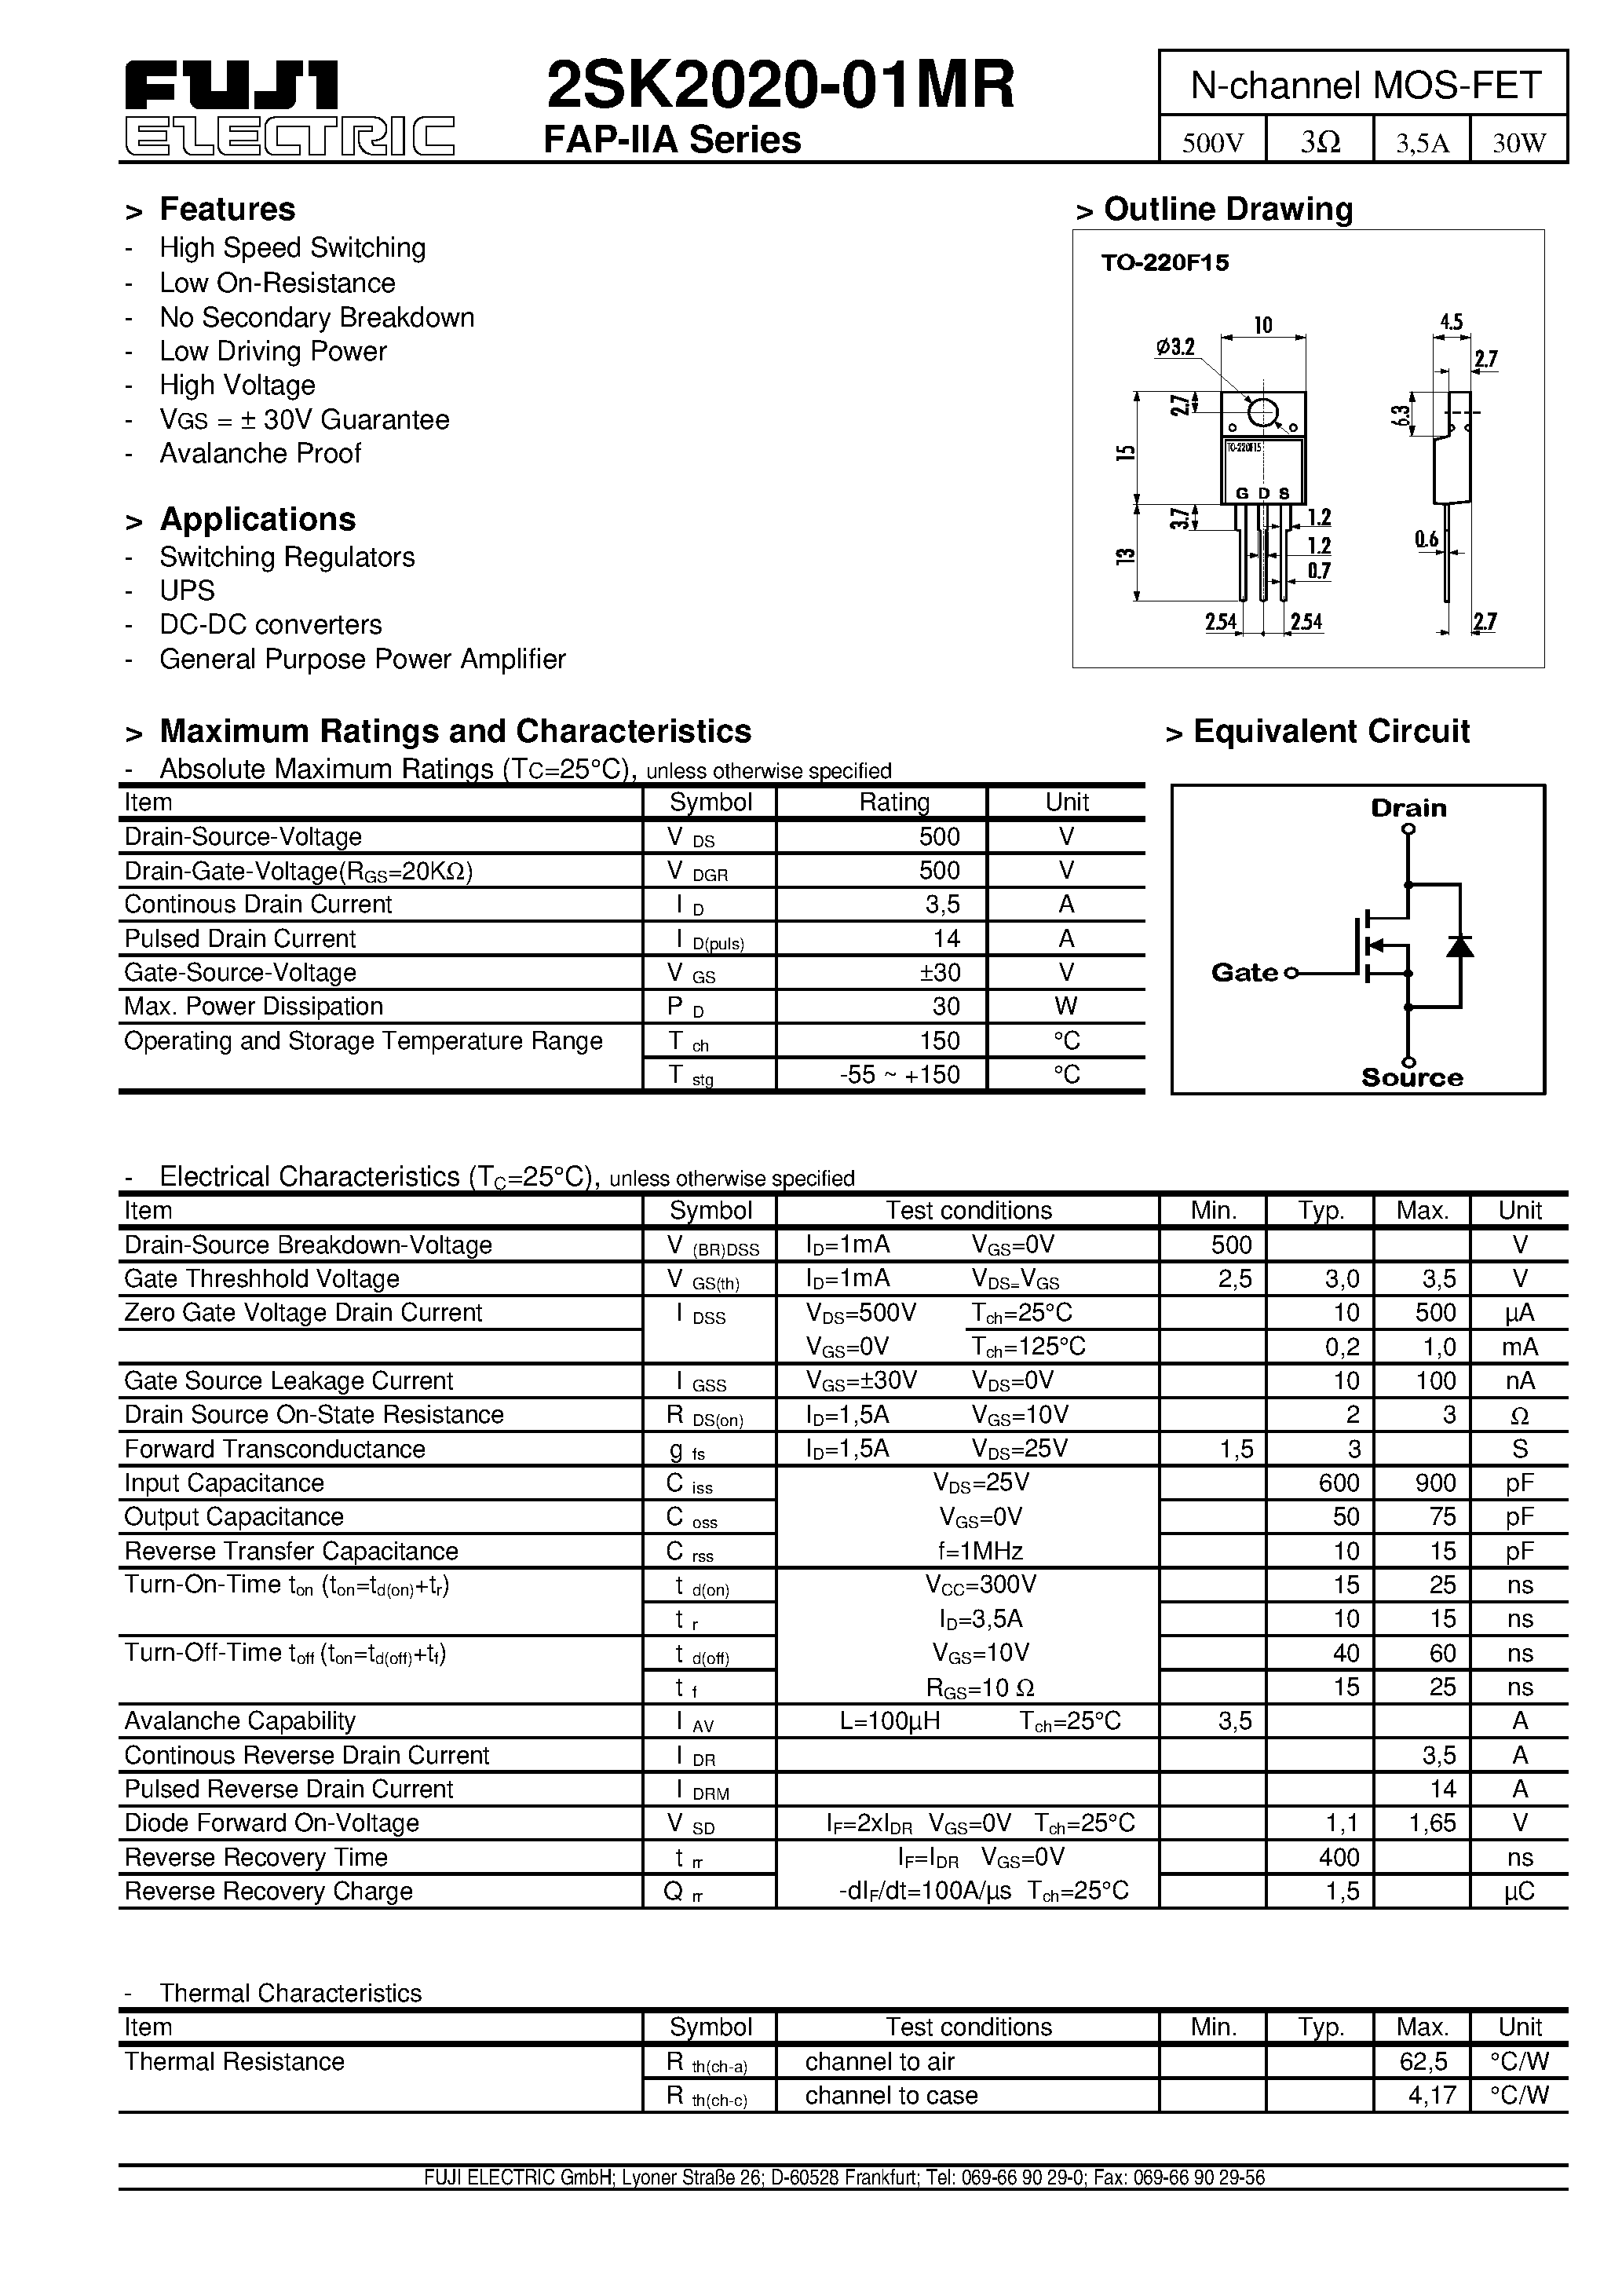 Datasheet 2SK2020-01MR - N-channel MOS-FET page 1